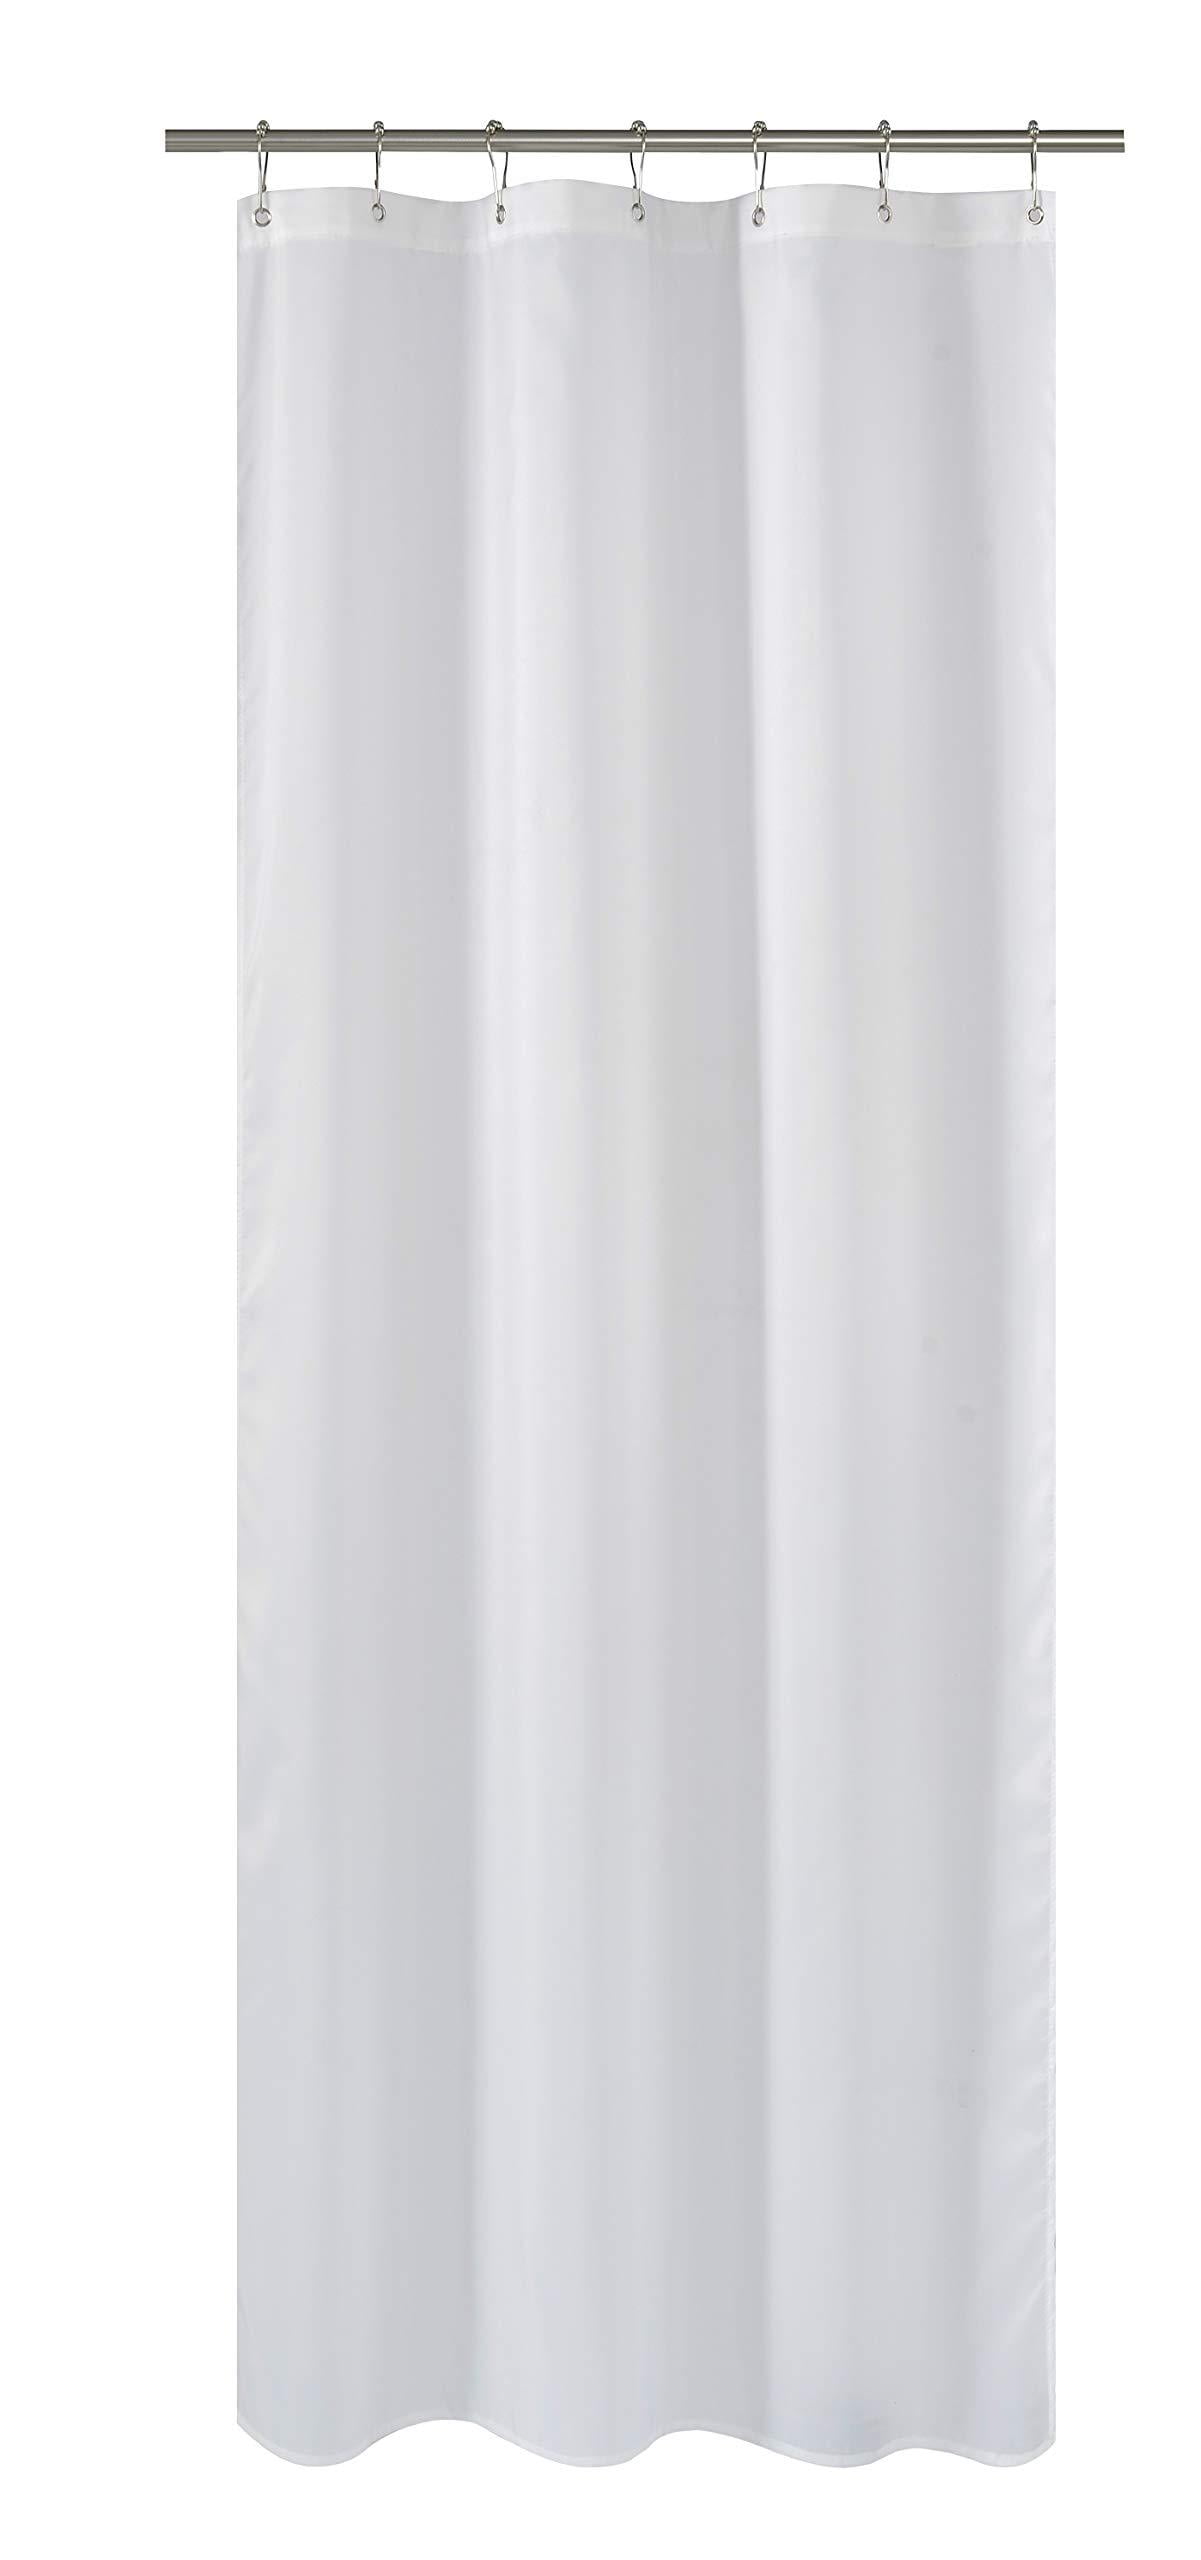 N&y Home Fabric Shower Curtain or Liner 36 X 72 Inches Bath Stall Size With 2 Bo for sale online 